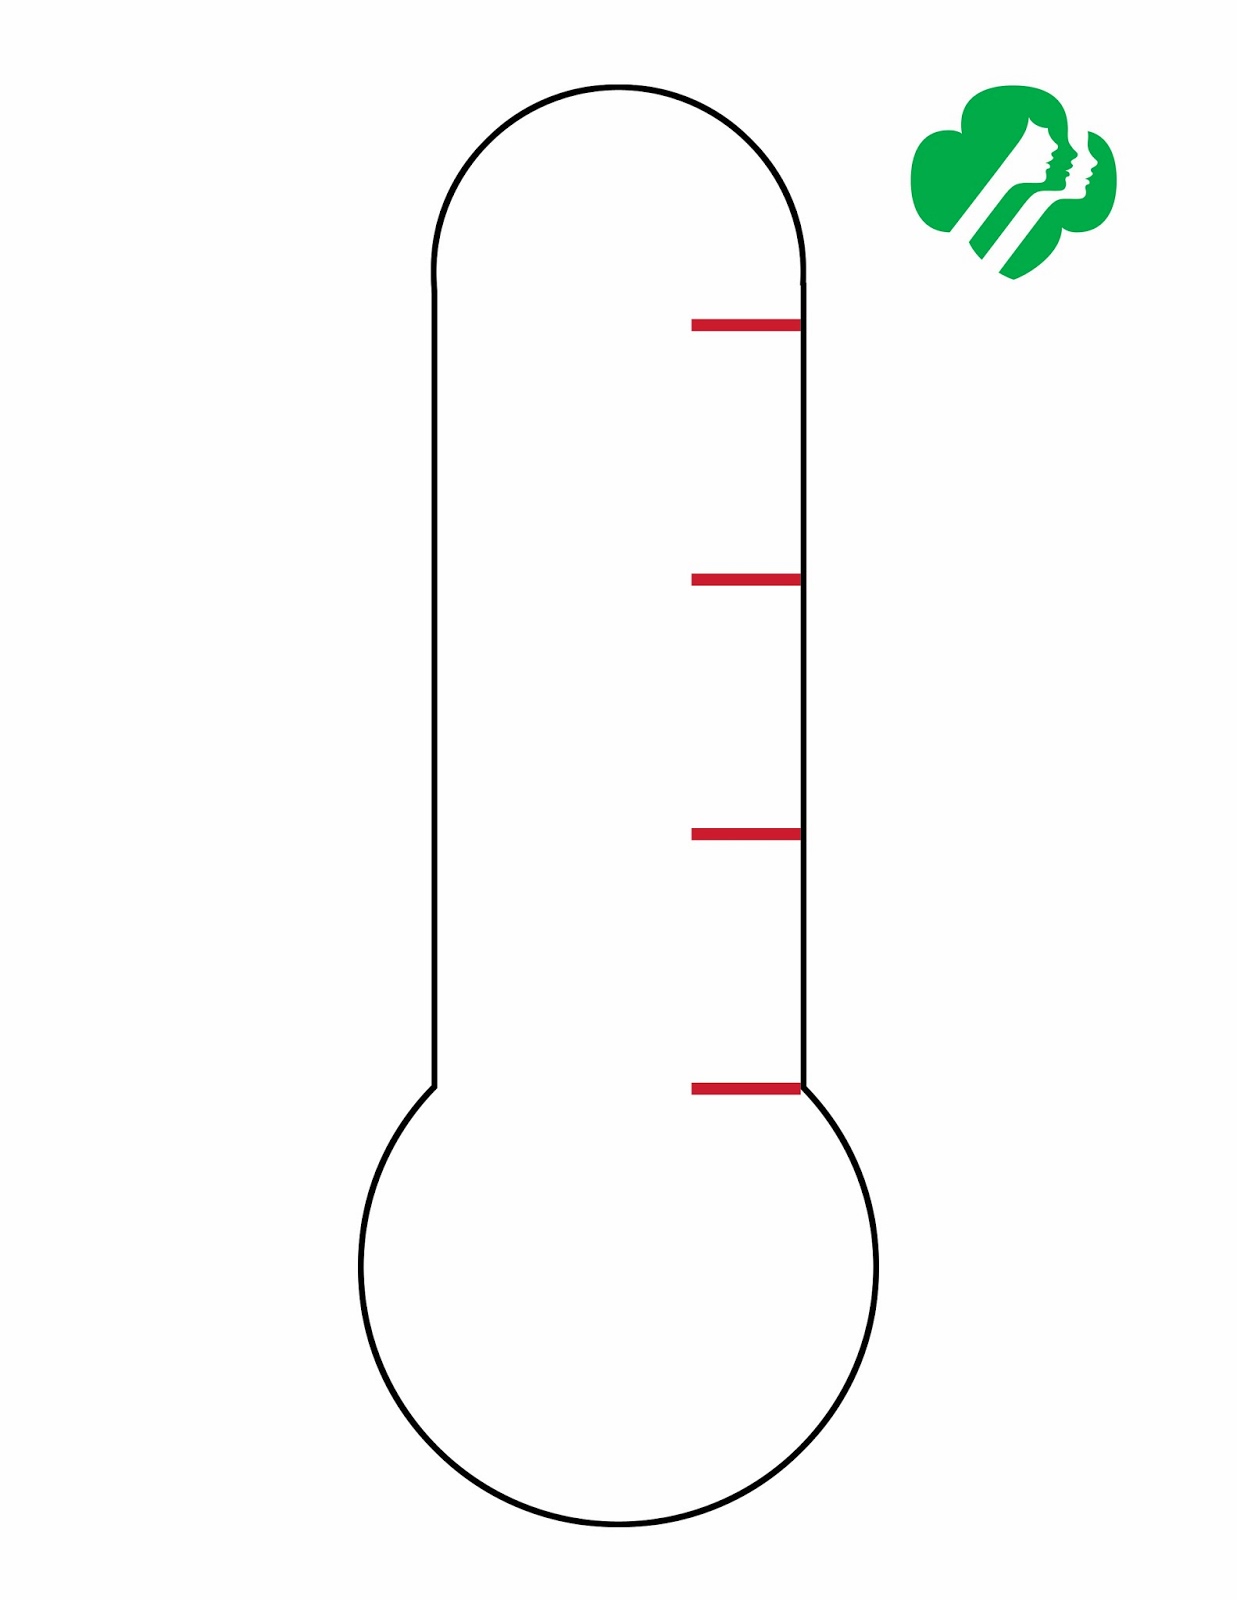 Free Blank Thermometer, Download Free Blank Thermometer png images